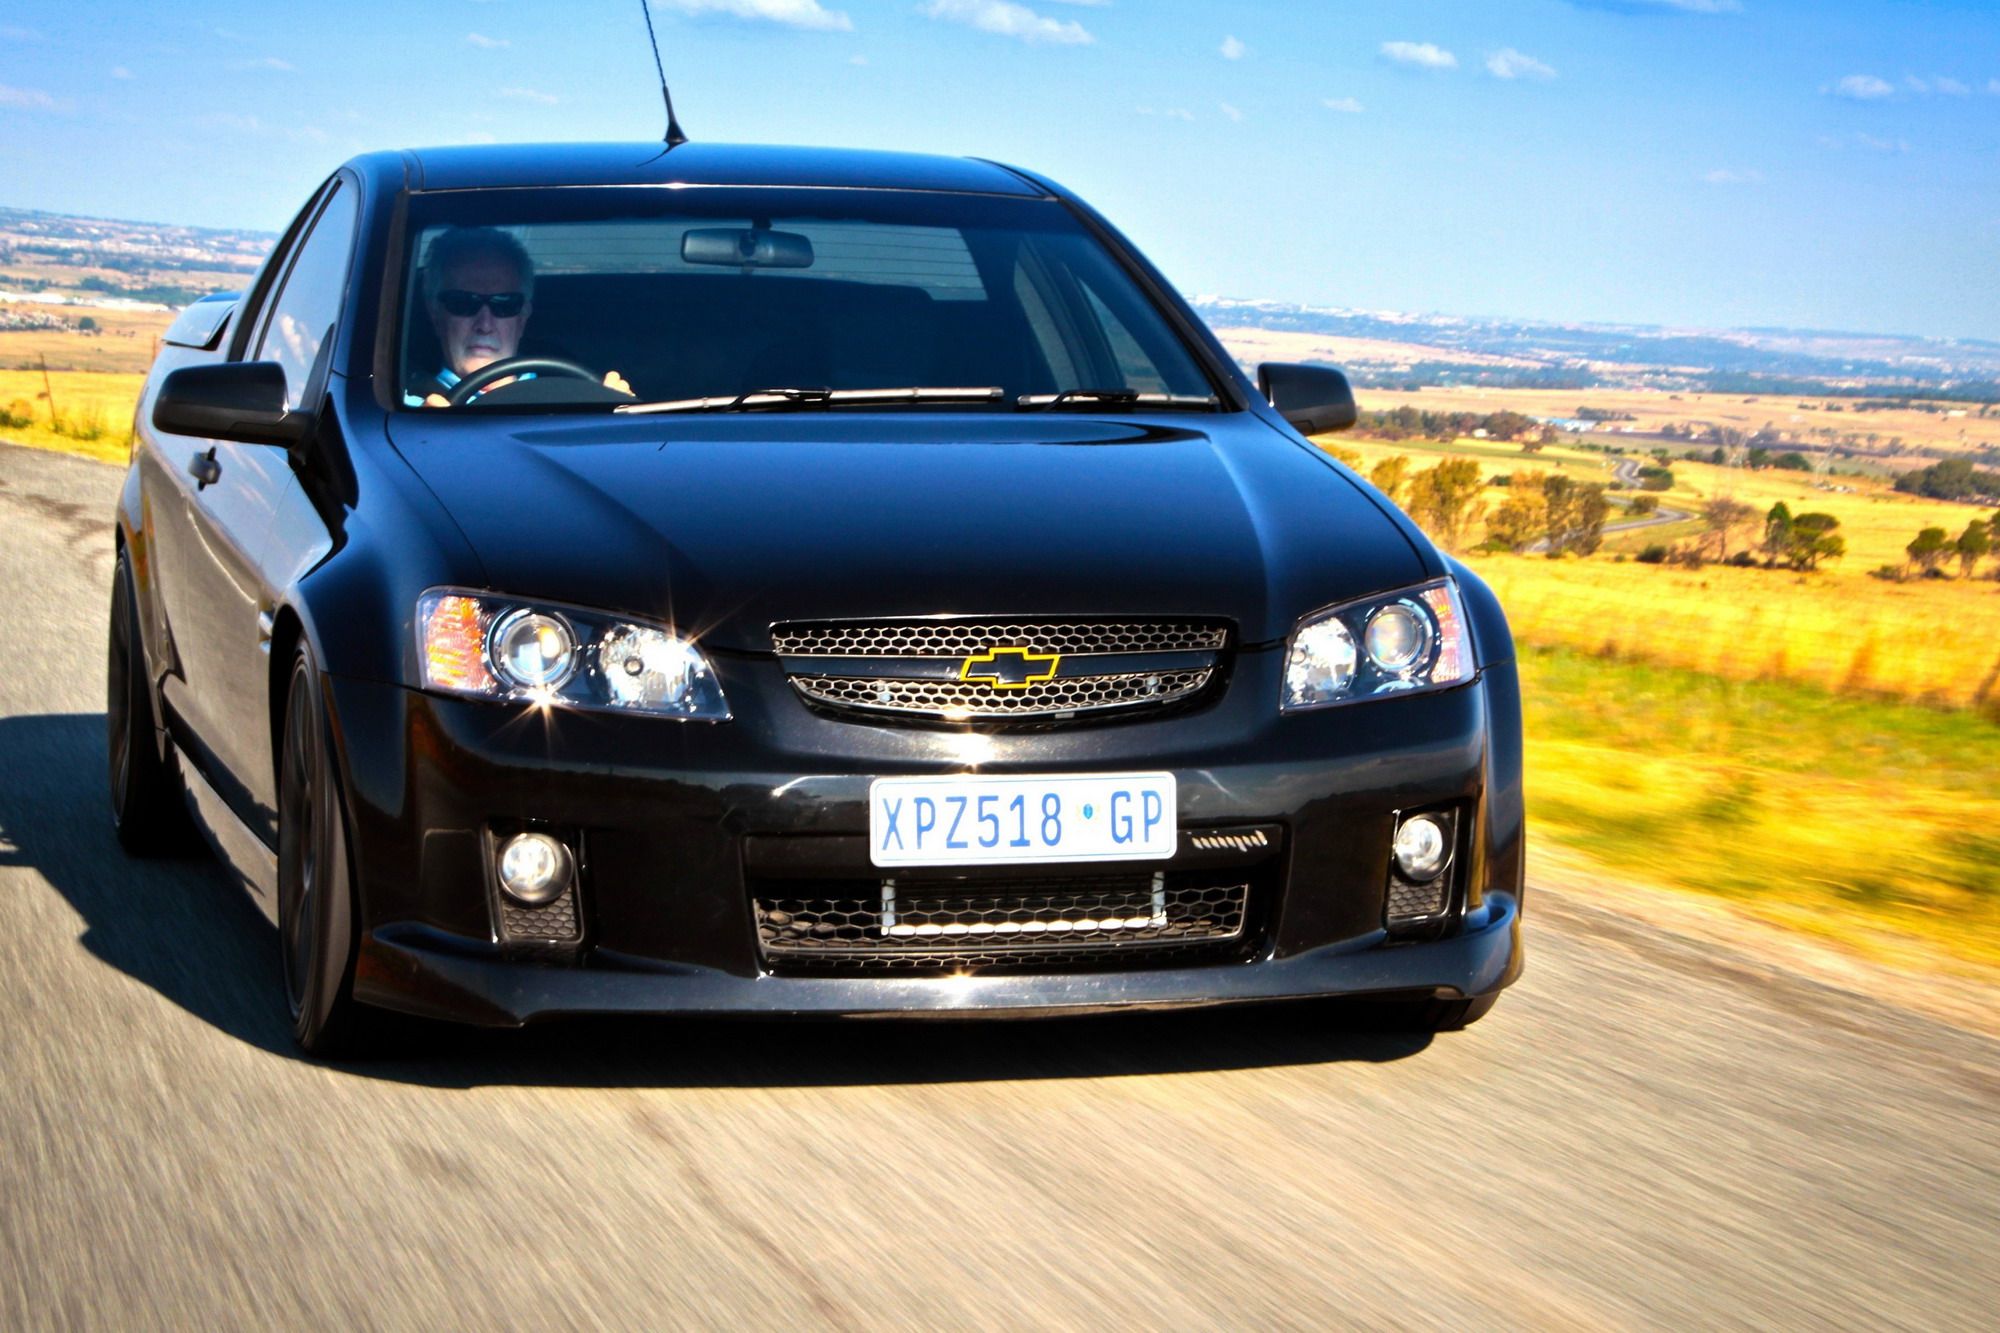 2010 Chevrolet SuperUte by LupiniPower